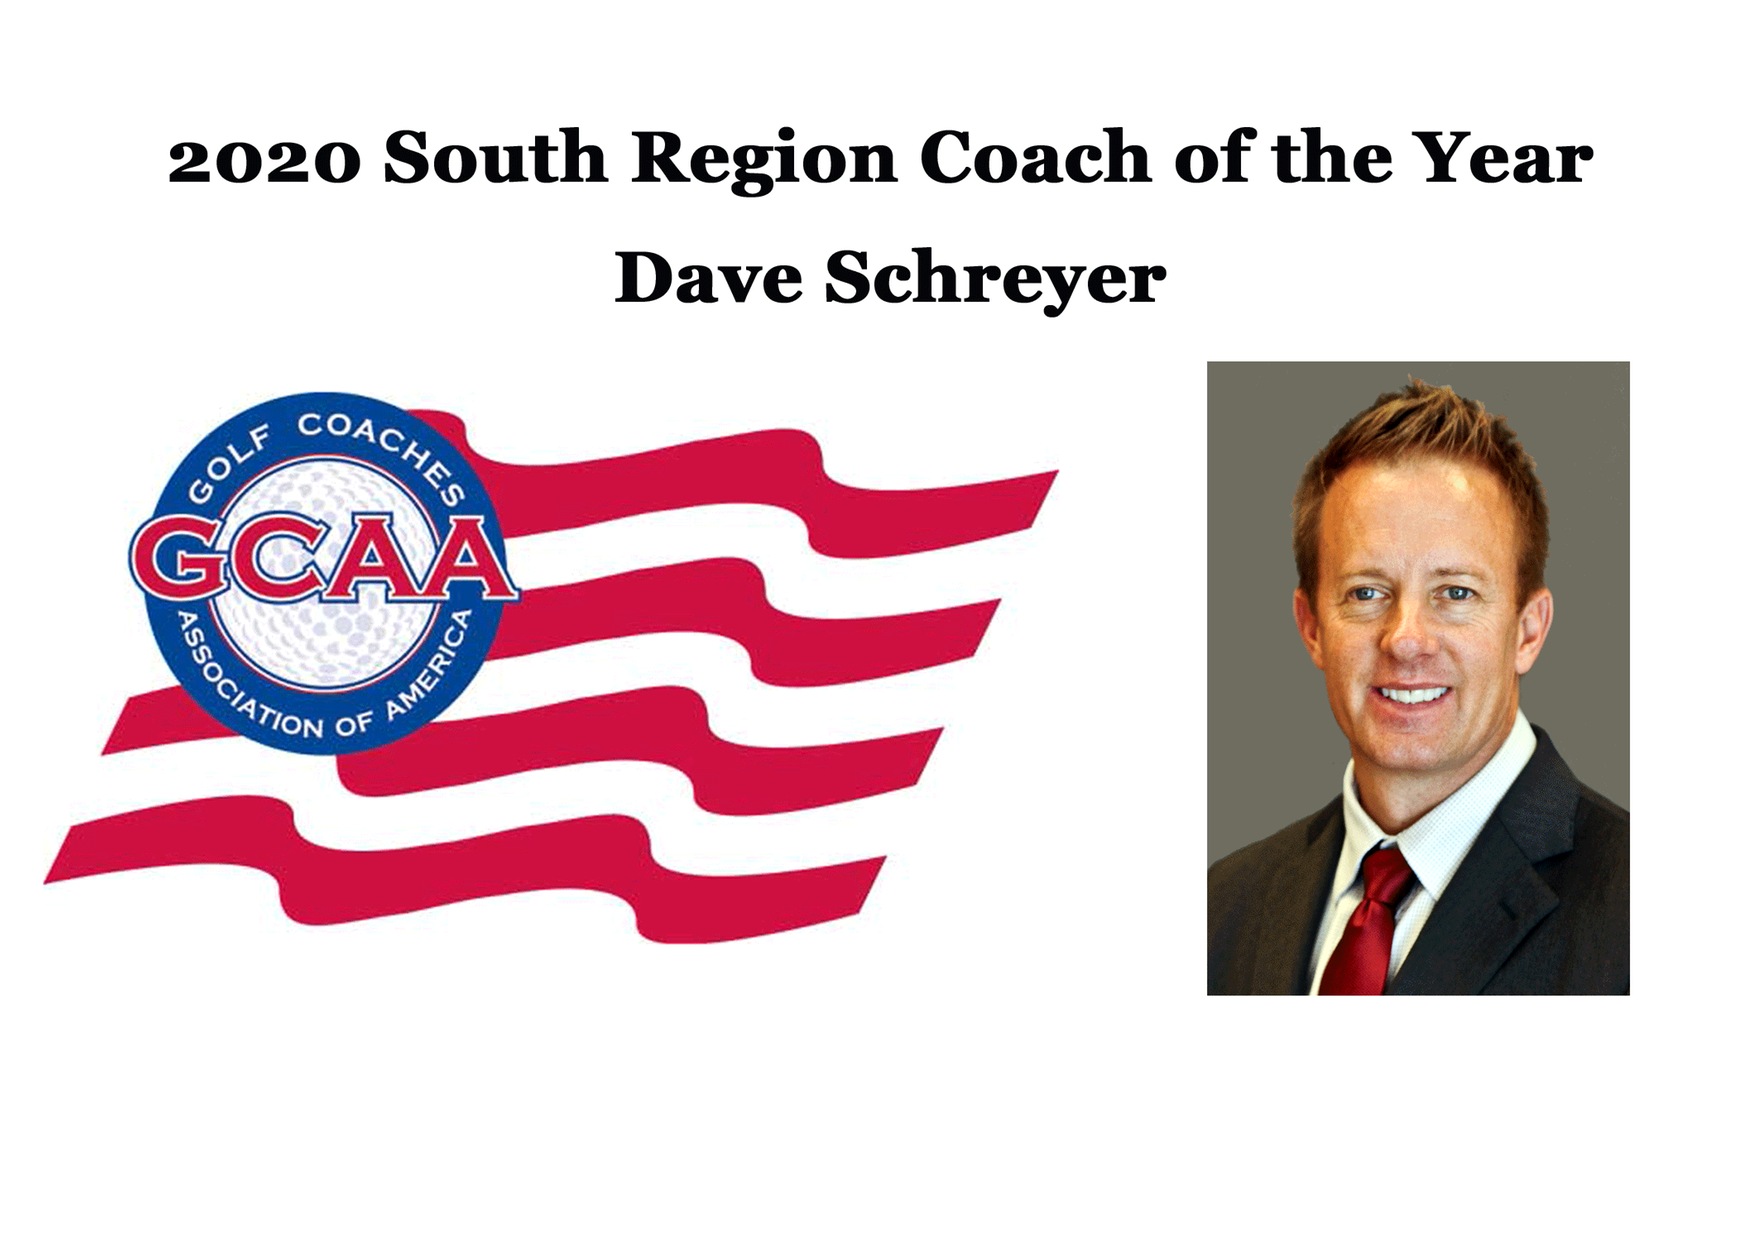 Schreyer named South Region Coach of the Year